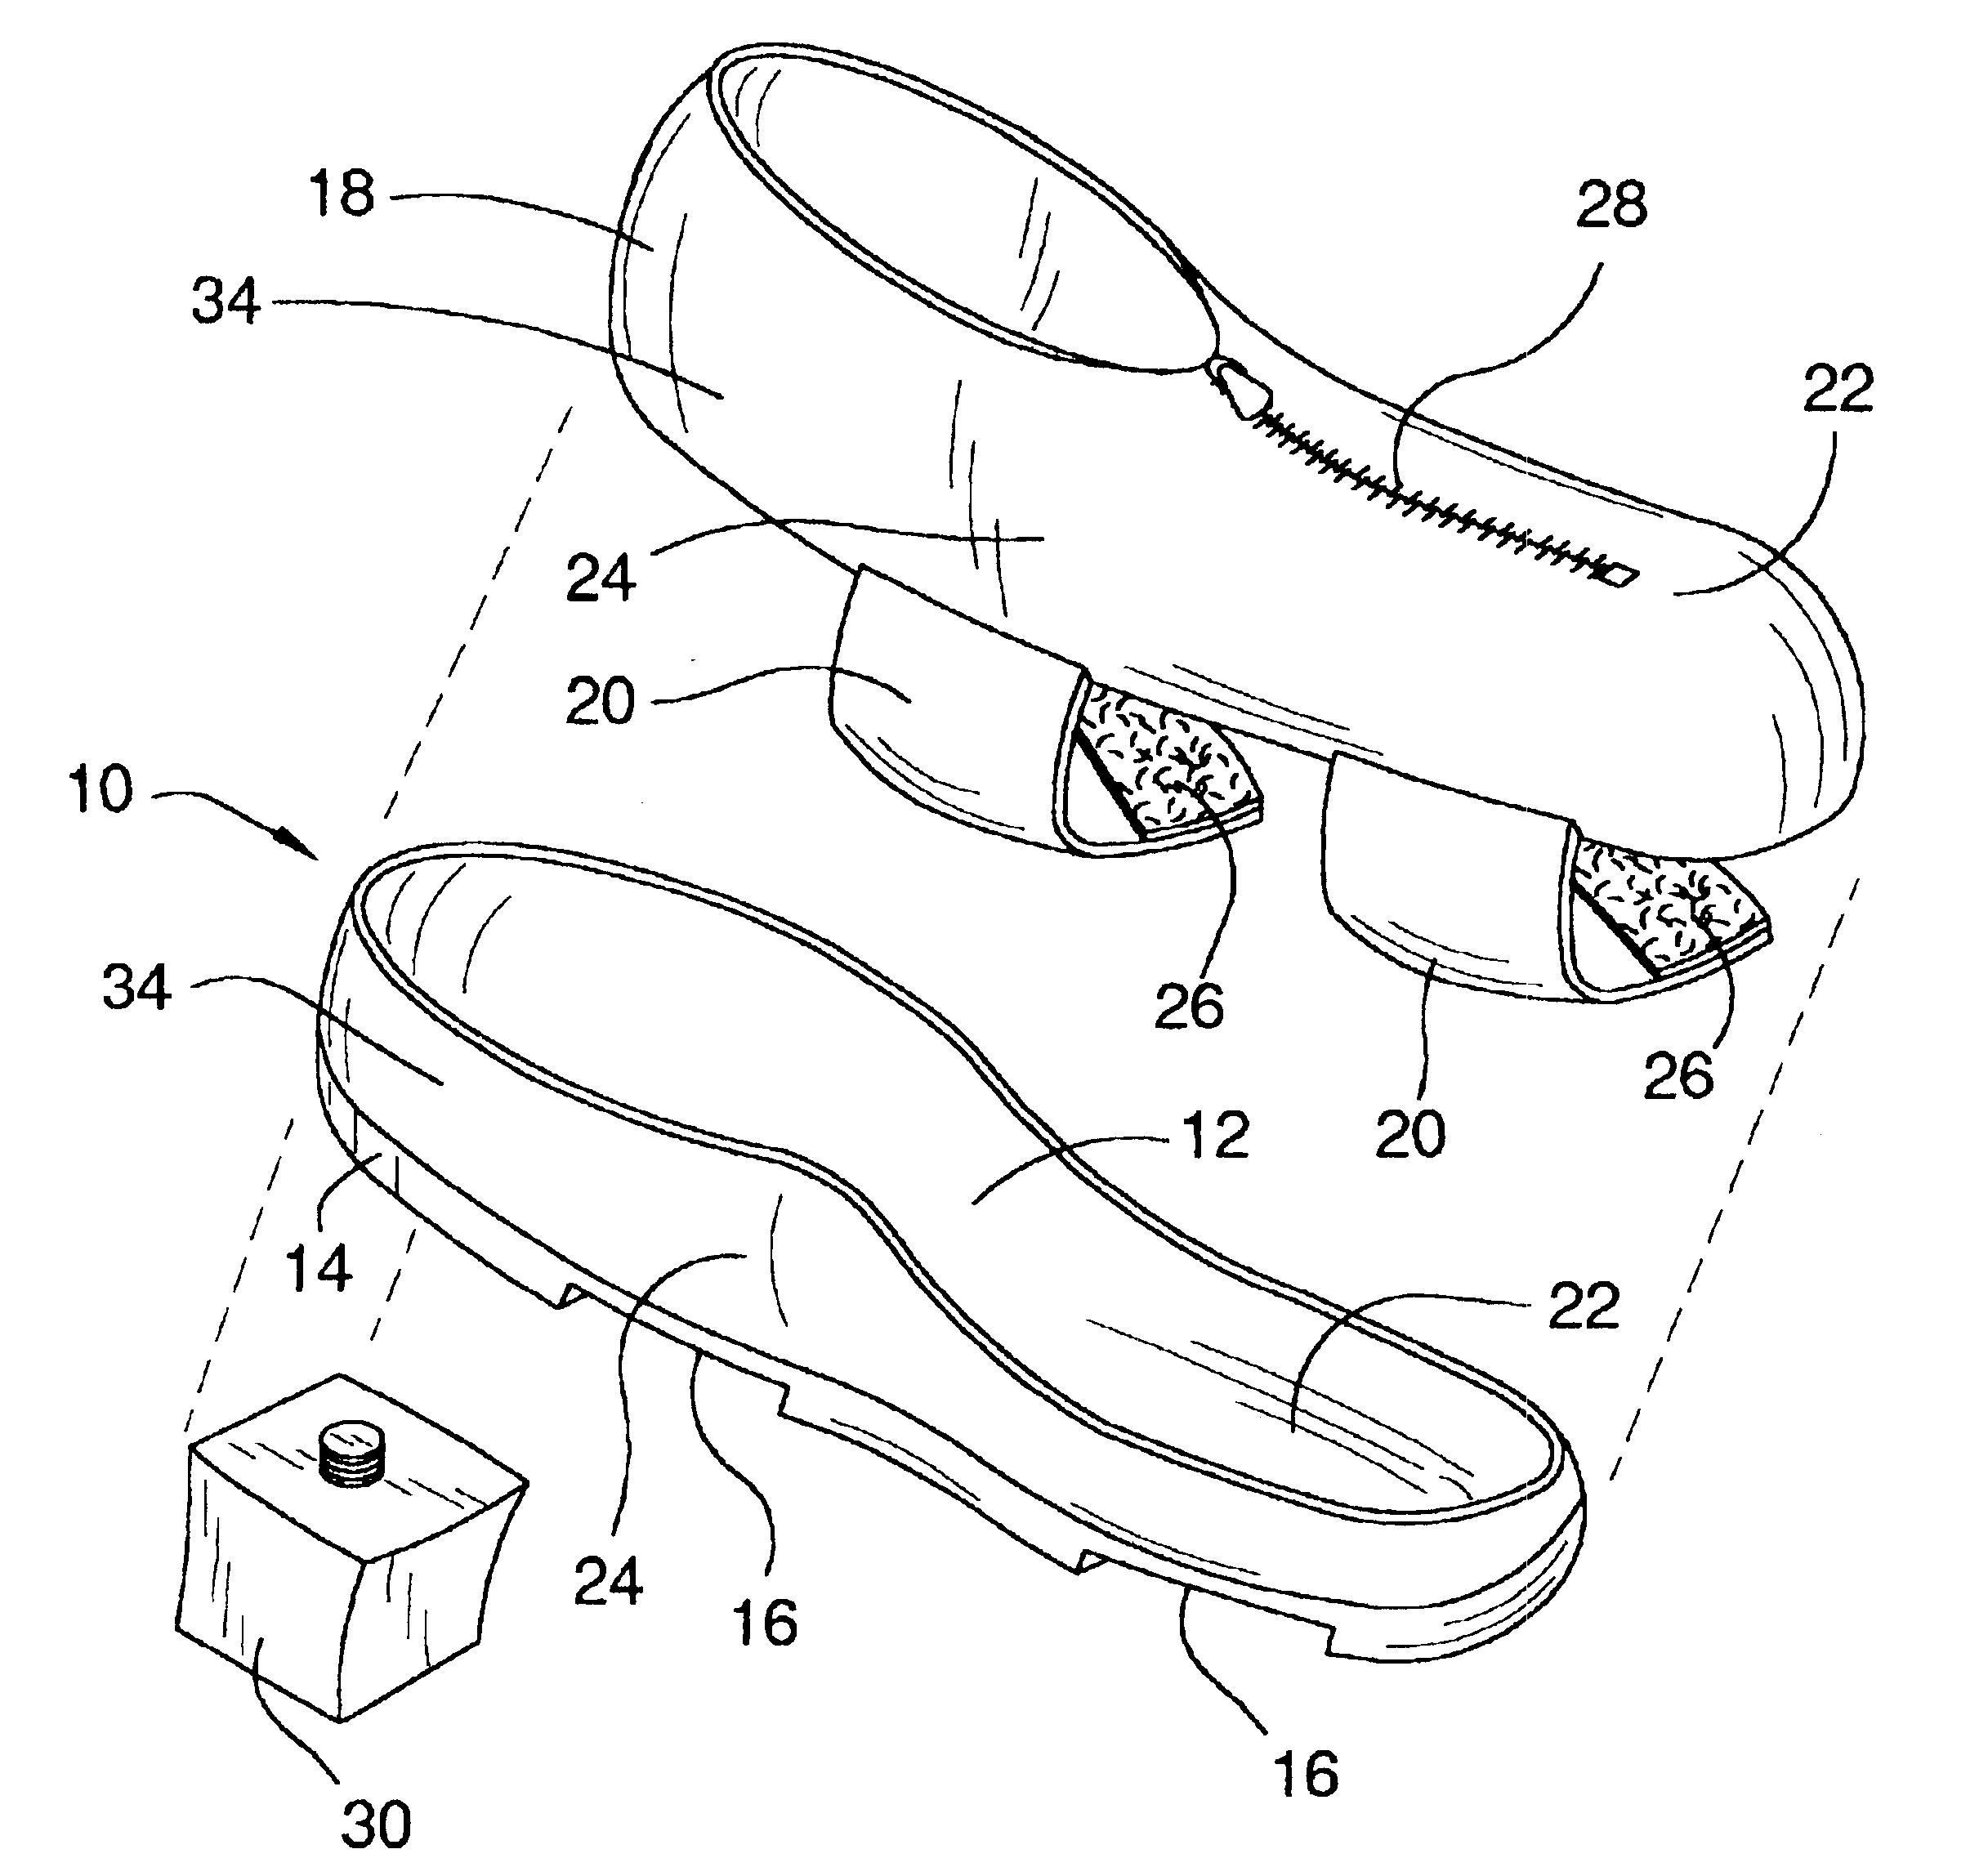 Shoe with interchangeable covers